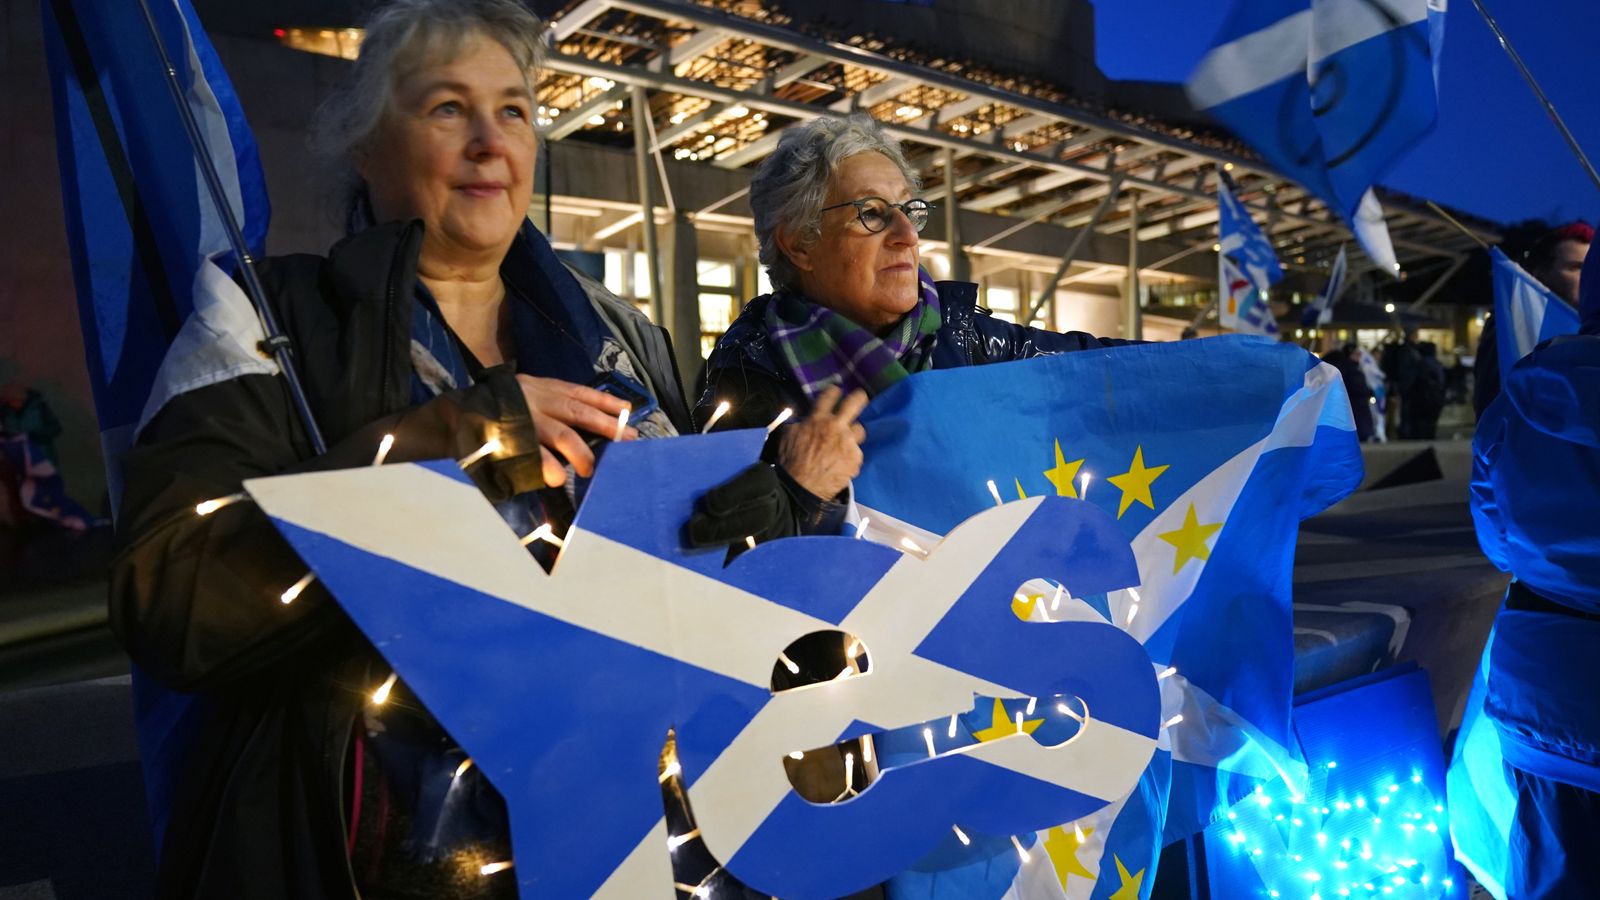 SNP reveals new plan to secure indyref2 without Westminster backing